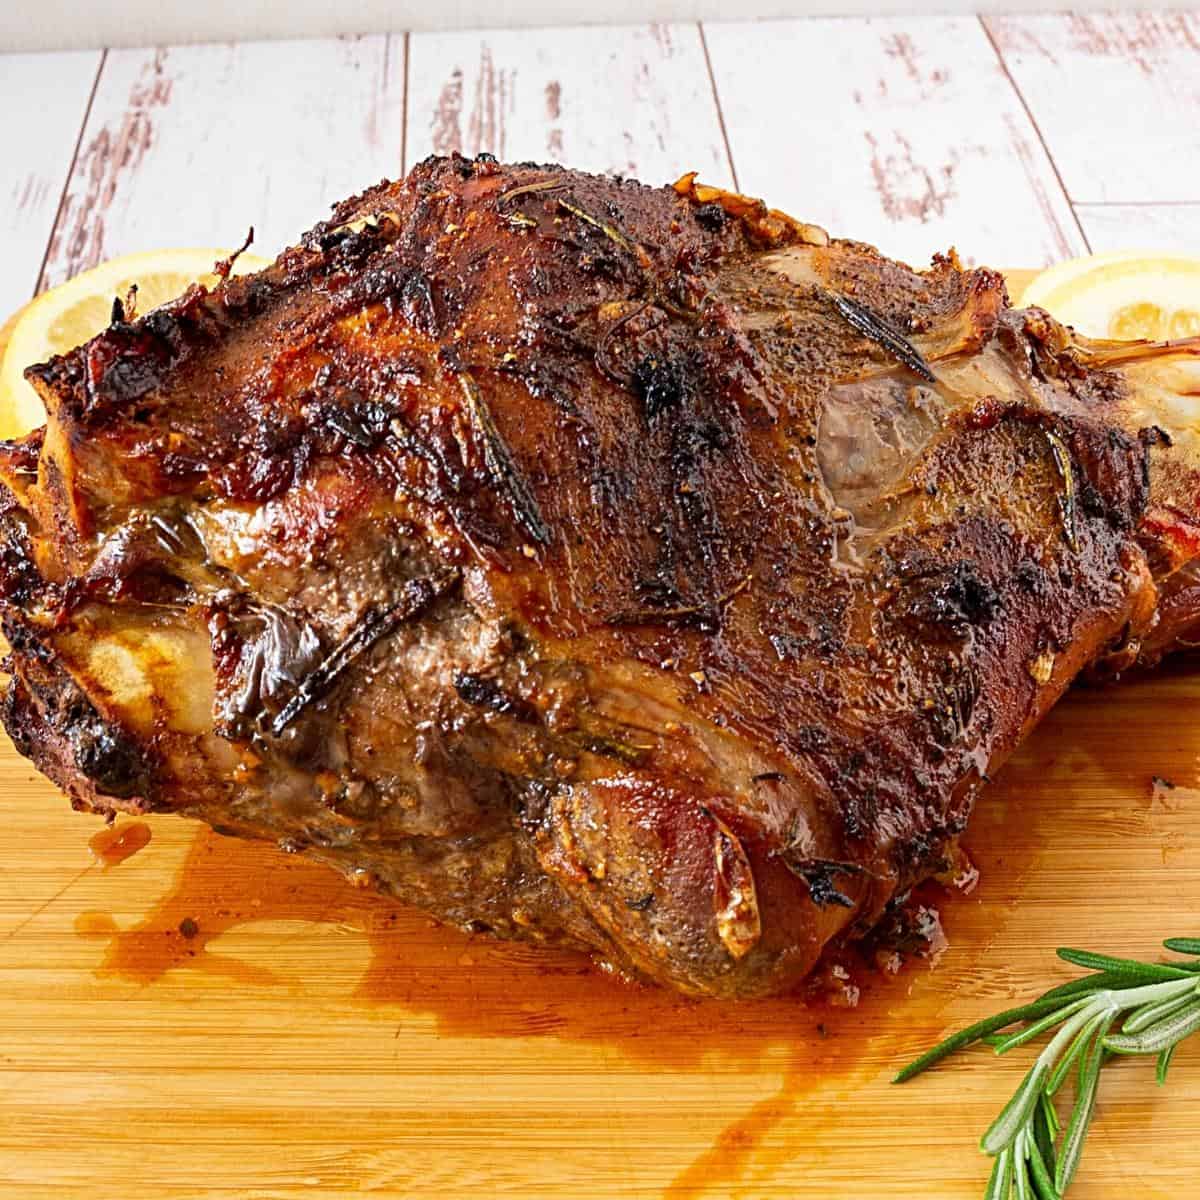 A roasted leg of lamb on a wooden board.